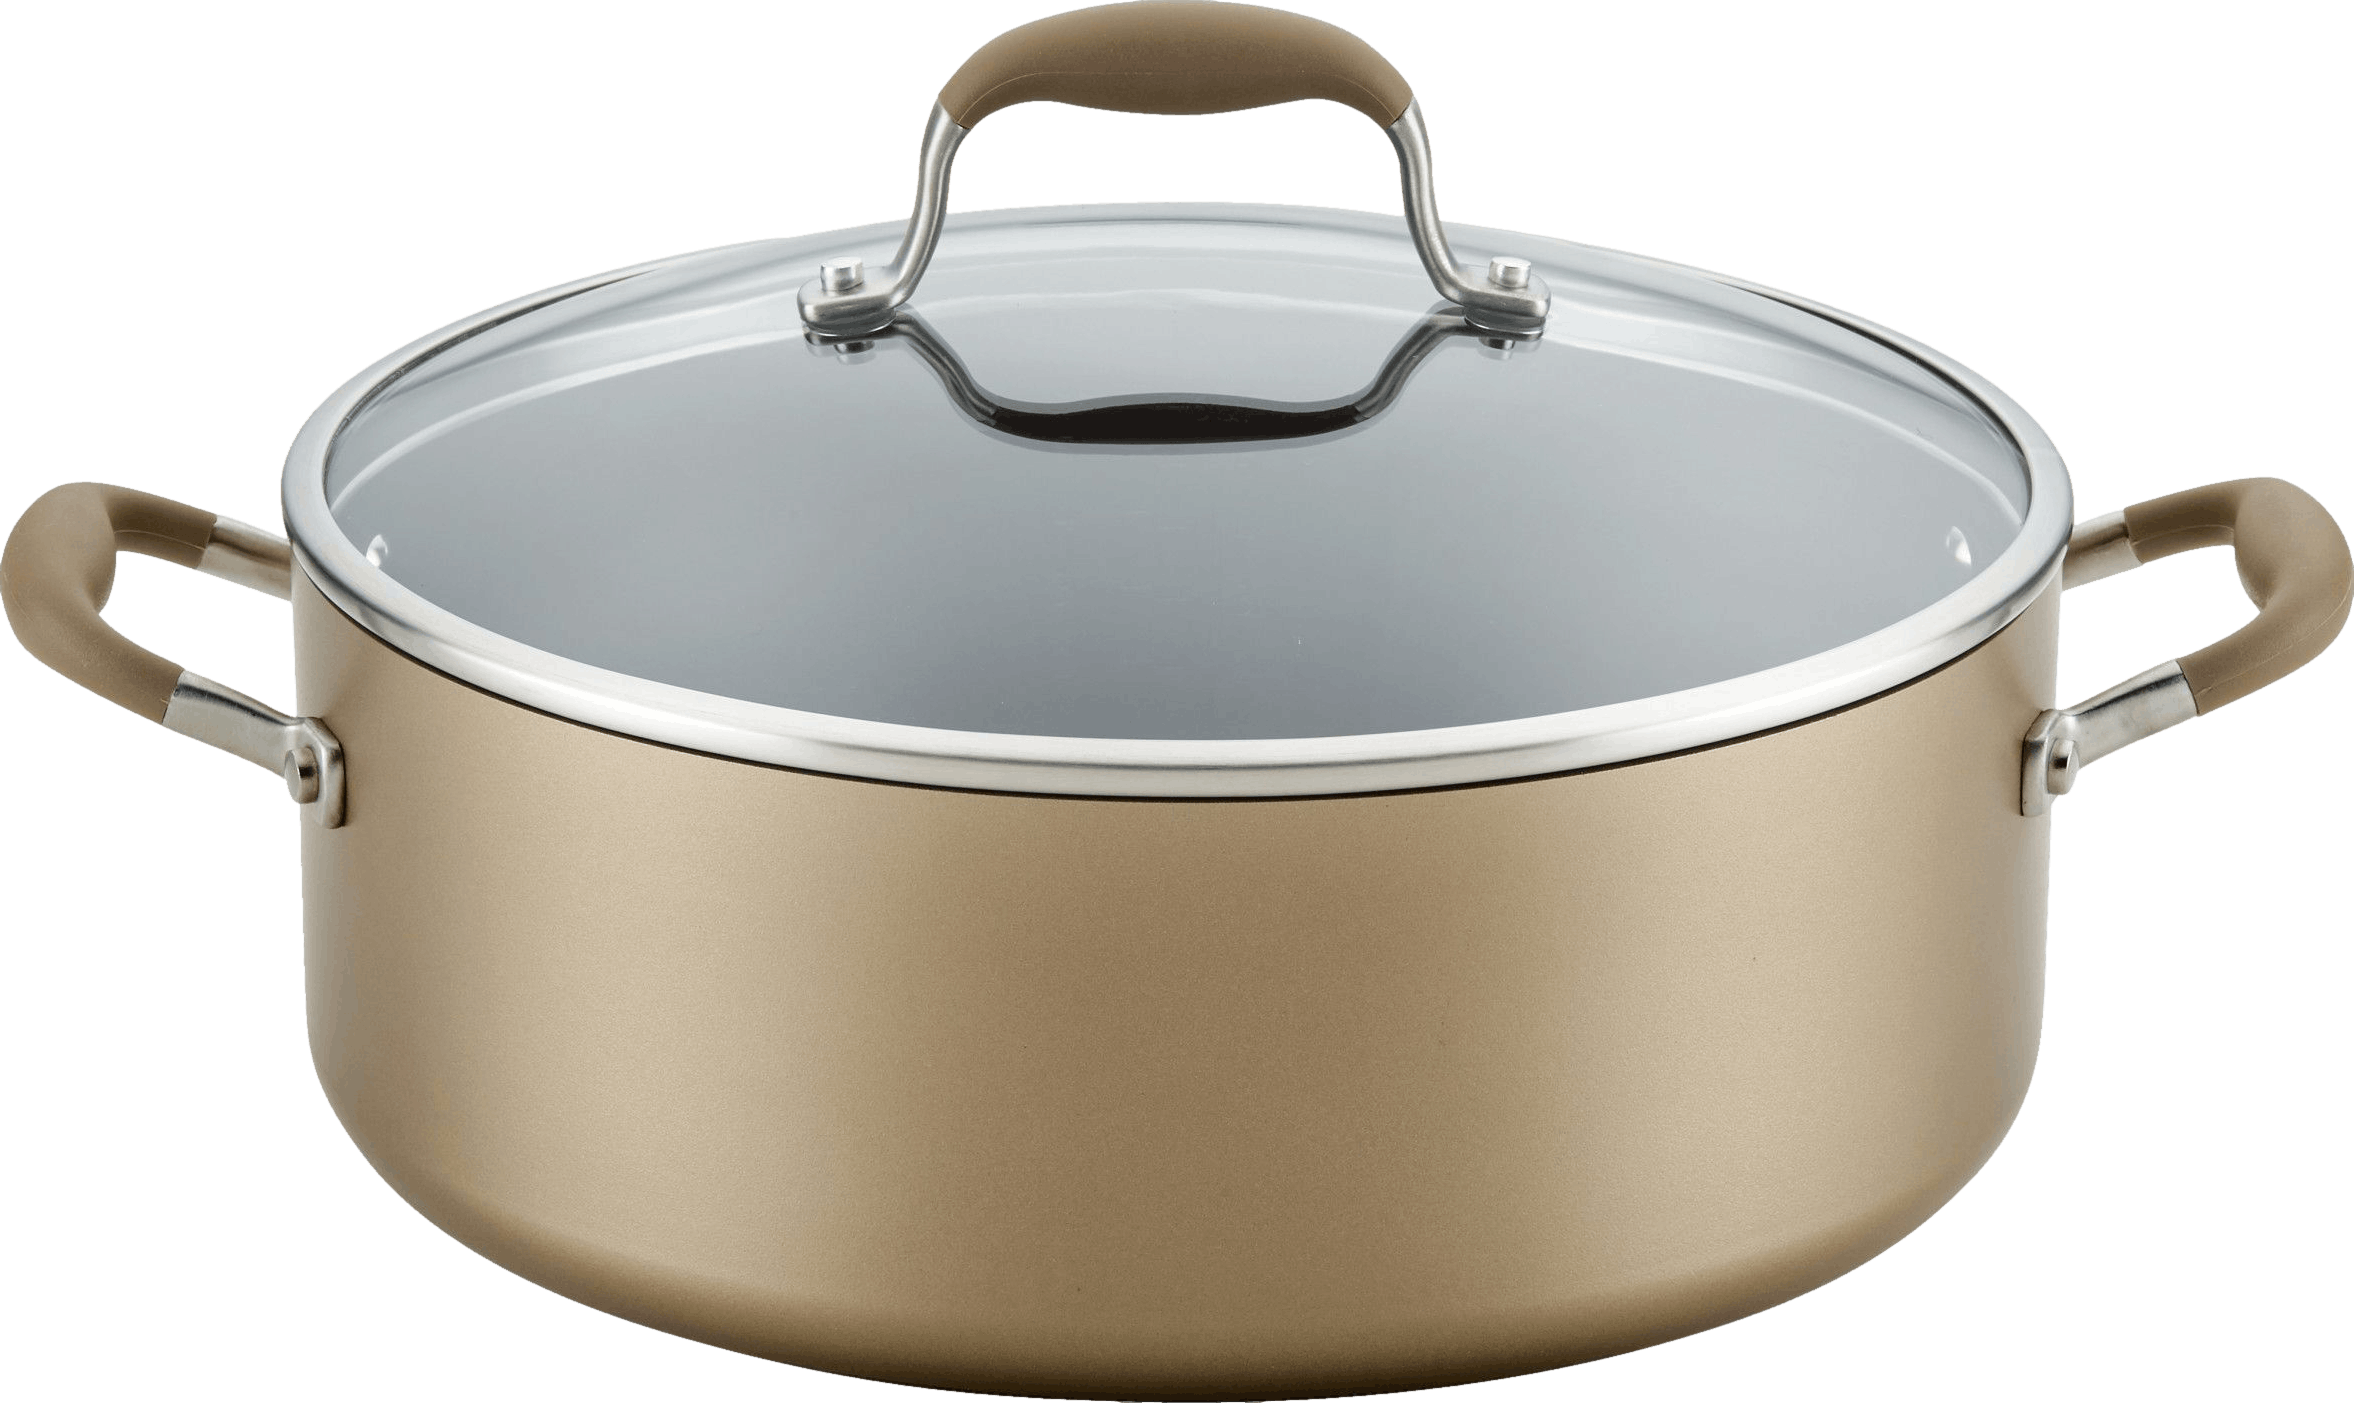 Anolon Advanced Home Hard-Anodized Nonstick Wide Stockpot with Lid · 7.5 QT